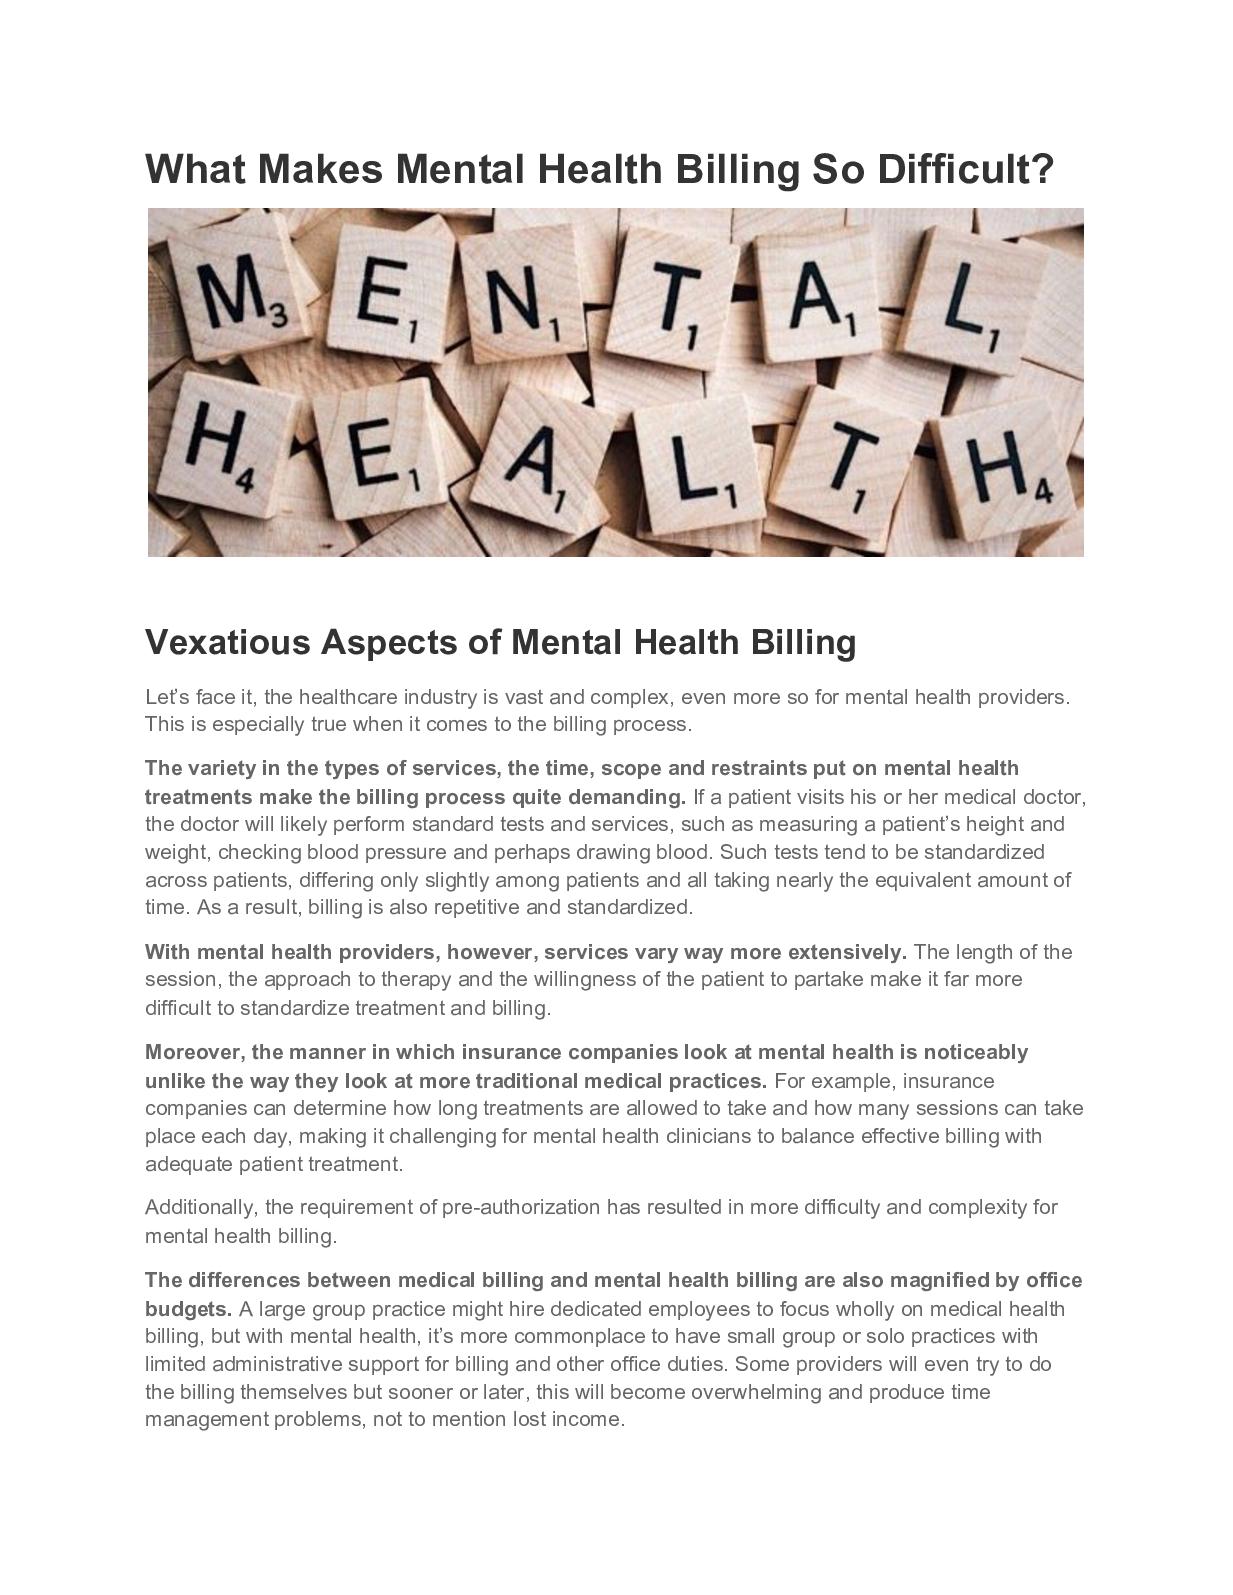 What Makes Mental Health Billing So Difficult?
L I

 

Vexatious Aspects of Mental Health Billing

Let's face it. the healthcare industry is vast and complex, even more so for mental health providers
This 1s especially true when it comes to the billing process

The variety in the types of services, the time, scope and restraints put on mental health
treatments make the billing process quite demanding. If a patient visits his or her medical doctor,
the doctor will likely perform standard tests and services, such as measuring a patient's height and
weight, checking blood pressure and perhaps drawing blood Such tests tend to be standardized
across patients, differing only slightly among patients and all taking nearly the equivalent amount of
time As a result. billing is also repetitive and standardized

With mental health providers, however, services vary way more extensively. The length of the
session. the approach to therapy and the willingness of the patient to partake make it far more
difficult to standardize treatment and billing

Moreover, the manner in which insurance companies look at mental health is noticeably
unlike the way they look at more traditional medical practices. For example, insurance
companies can determine how long treatments are allowed to take and how many sessions can take
place each day, making it challenging for mental health clinicians to balance effective billing with
adequate patent treatment

Additionally, the requirement of pre-authonzation has resulted in more difficulty and complexity for
mental health billing

The differences between medical billing and mental health billing are also magnified by office
budgets. A large group practice might hire dedicated employees to focus wholly on medical health
billing, but with mental health, i's more commonplace to have small group or solo practices with
limited administrative support for billing and other office duties Some providers will even try to do
the billing themselves but sooner or later, this will become overwhelming and produce ime
management problems. not to mention lost income